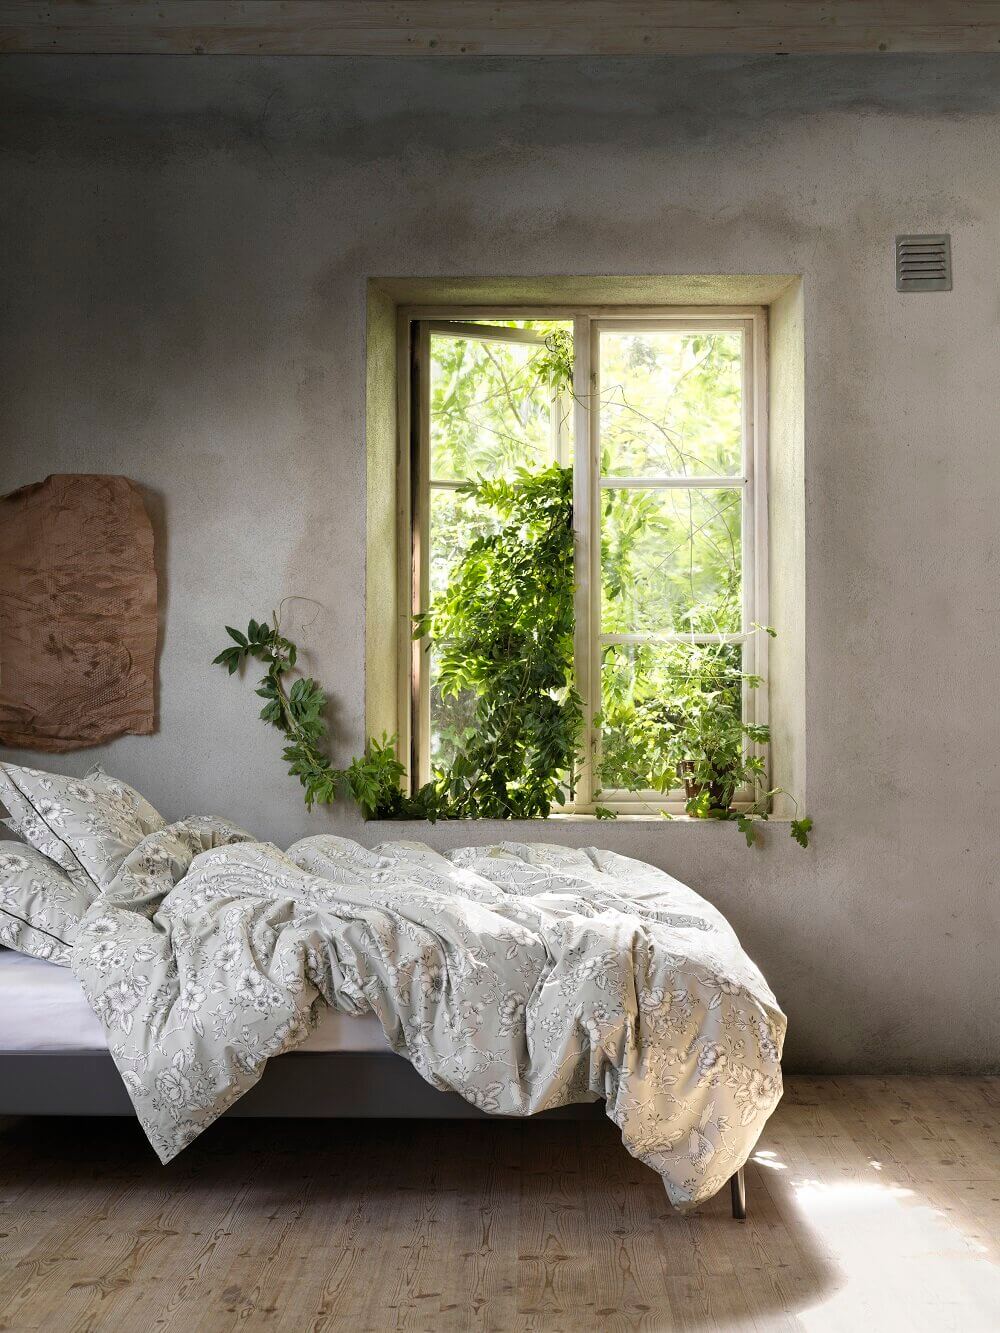 ikea spring collection 2020 mindful living nordroom IKEA Spring Collection 2020: Mindful Living and Close to Nature